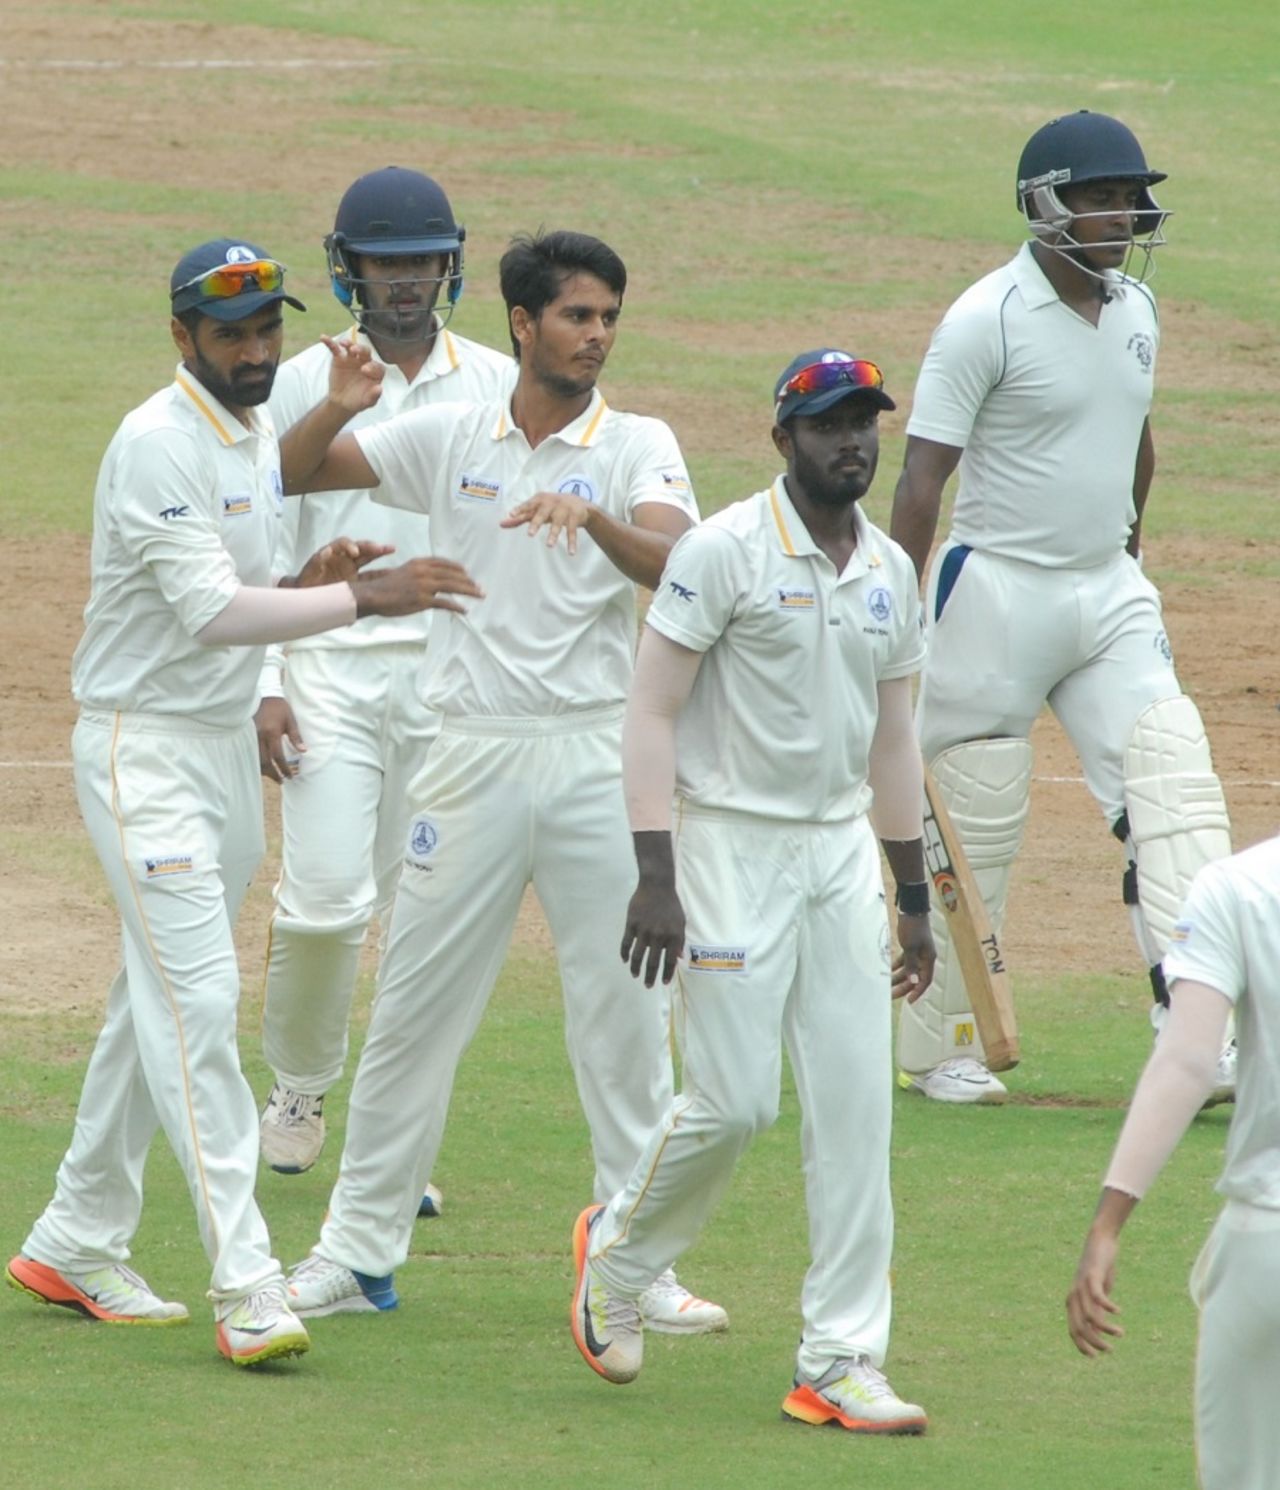 K Vignesh is mobbed by his team-mates, Tamil Nadu v Tripura, Ranji Trophy 2017-18, second round, 2nd day, Chennai, October 15, 2017